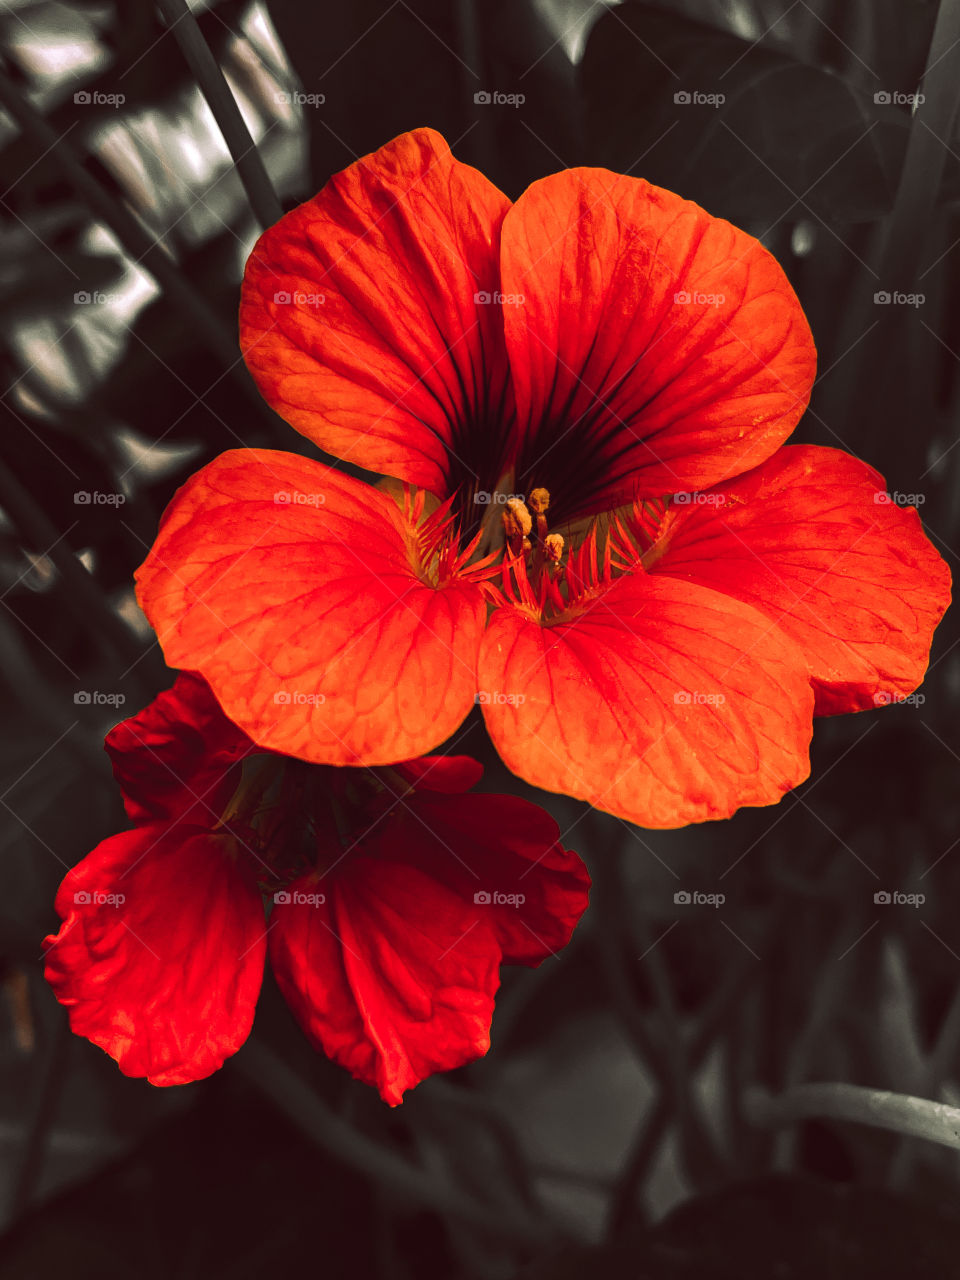 Bright colored flower mood moody natural mother nature outdoors yard grass blossoming blooming bloom blossom botany flowers plant plants vegetation greenery